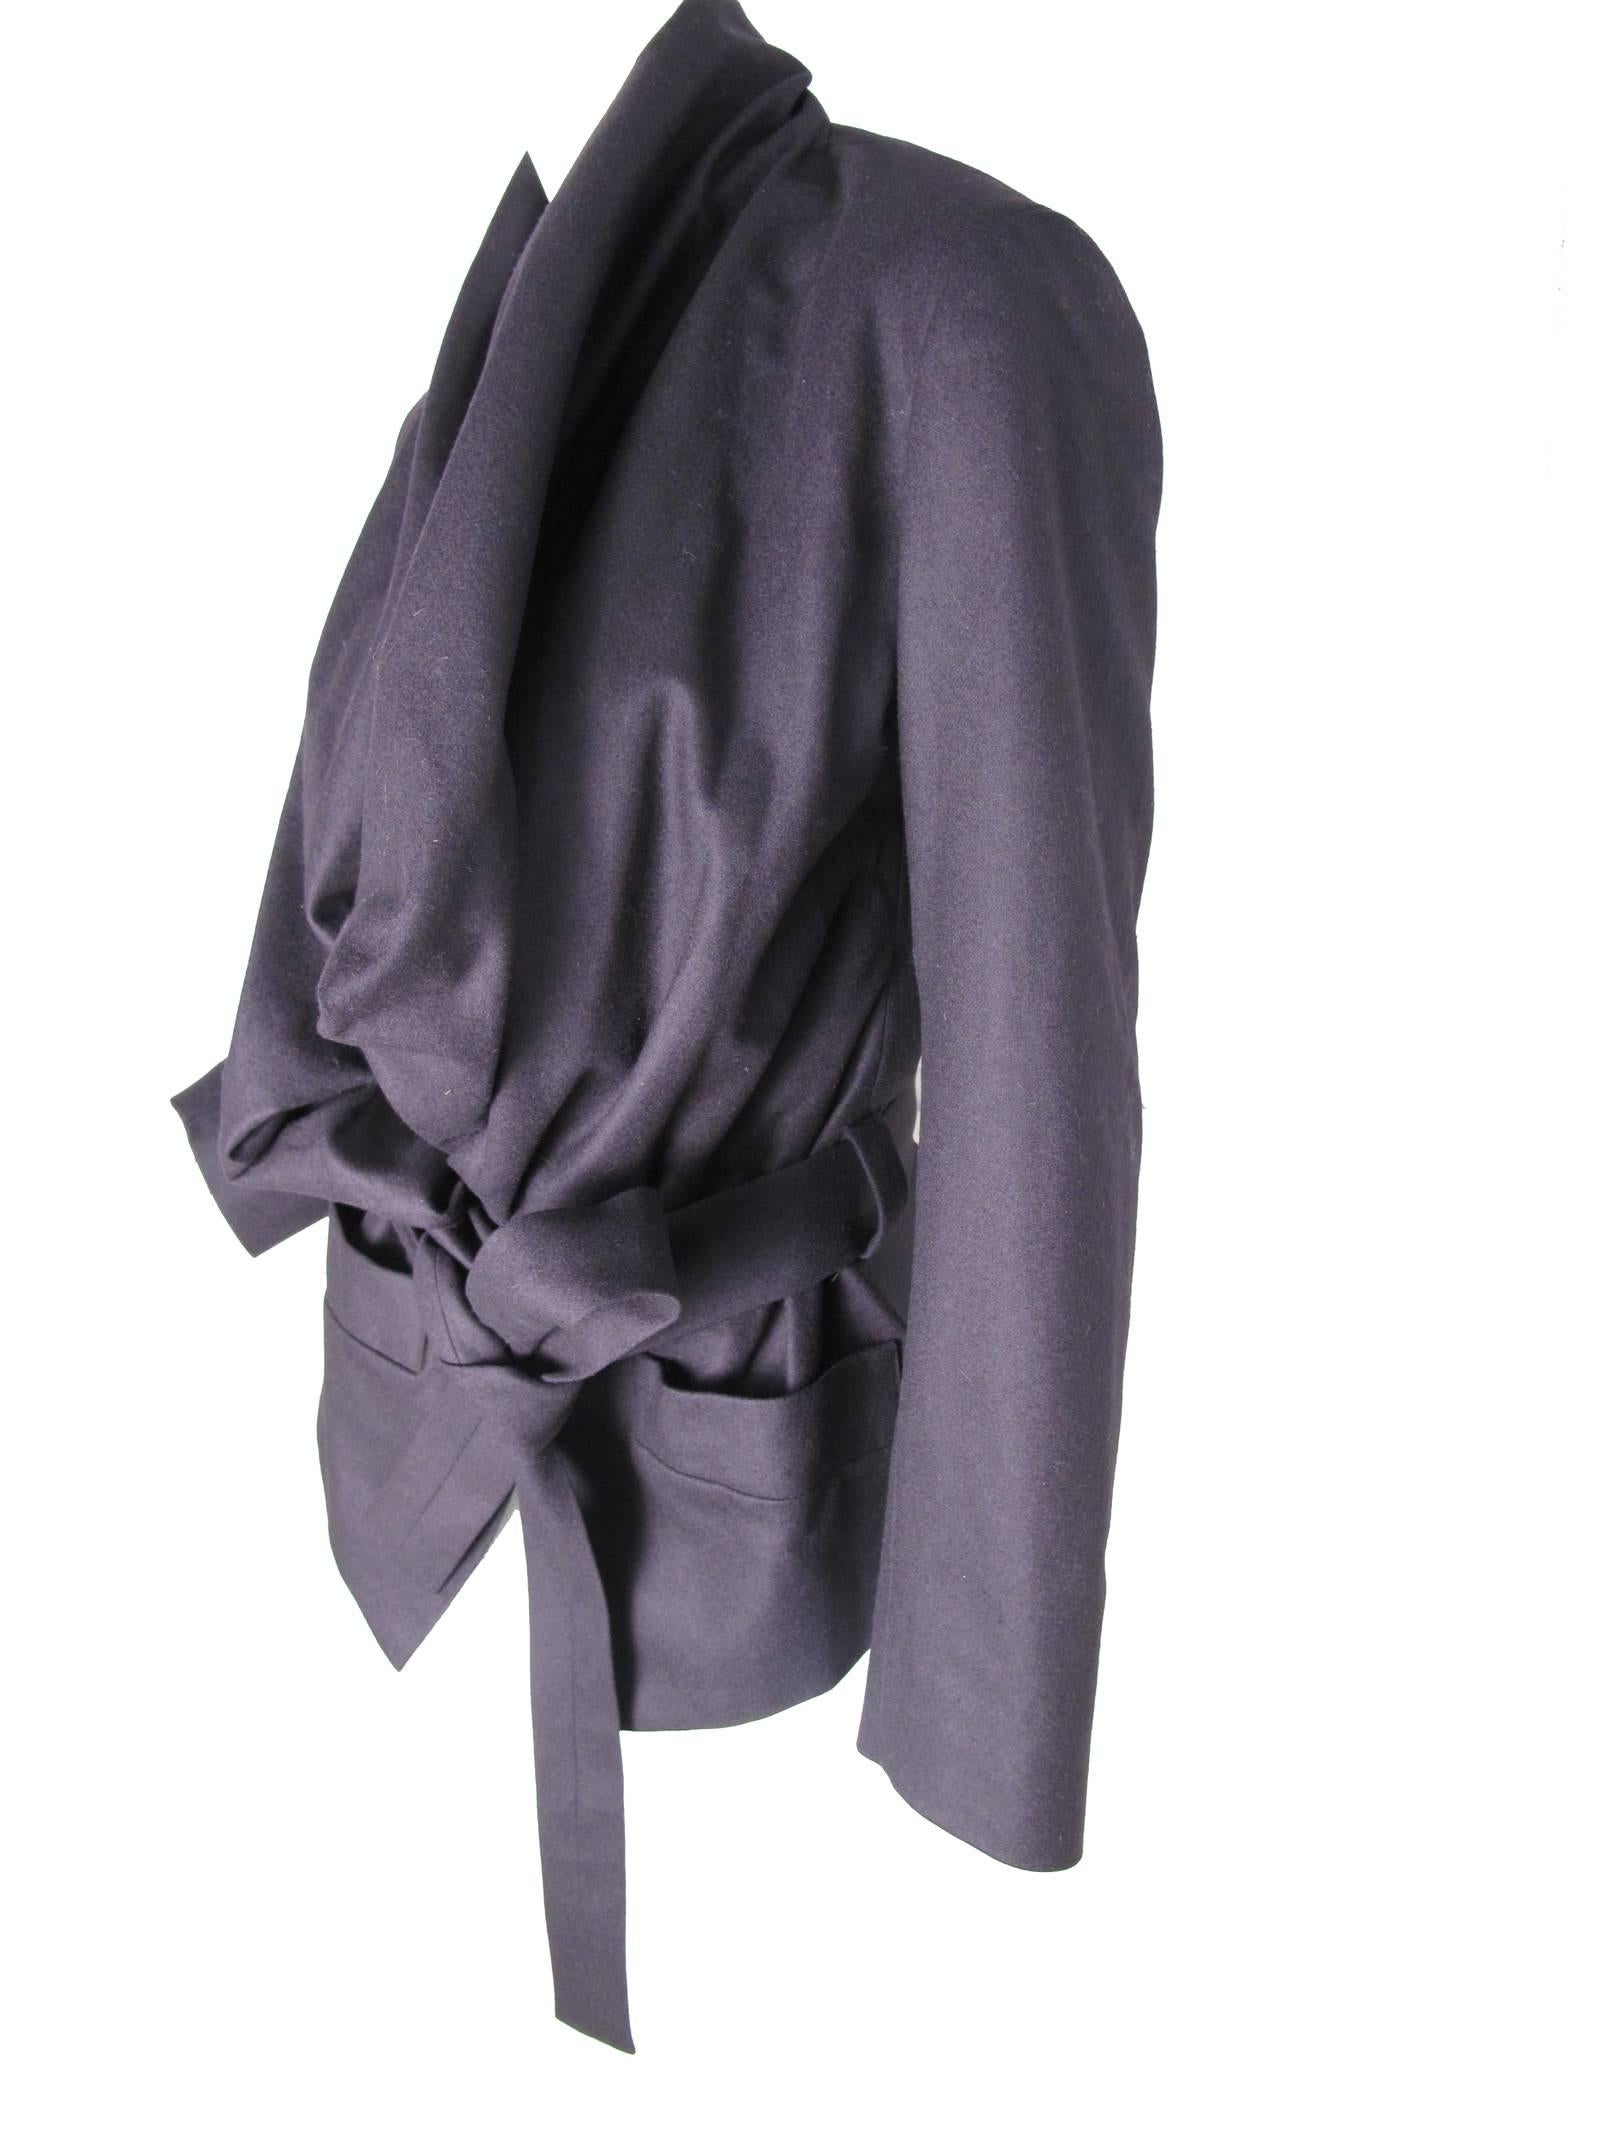 Vivienne Westwood Anglomania deep purple felt ( wool/ cashmere blend) jacket with tie at waist. Two front pockets, interesting neckline details.  Condition: Excellent.  Size 44 / US 8 

We accept returns for refund, please see our terms.  We offer